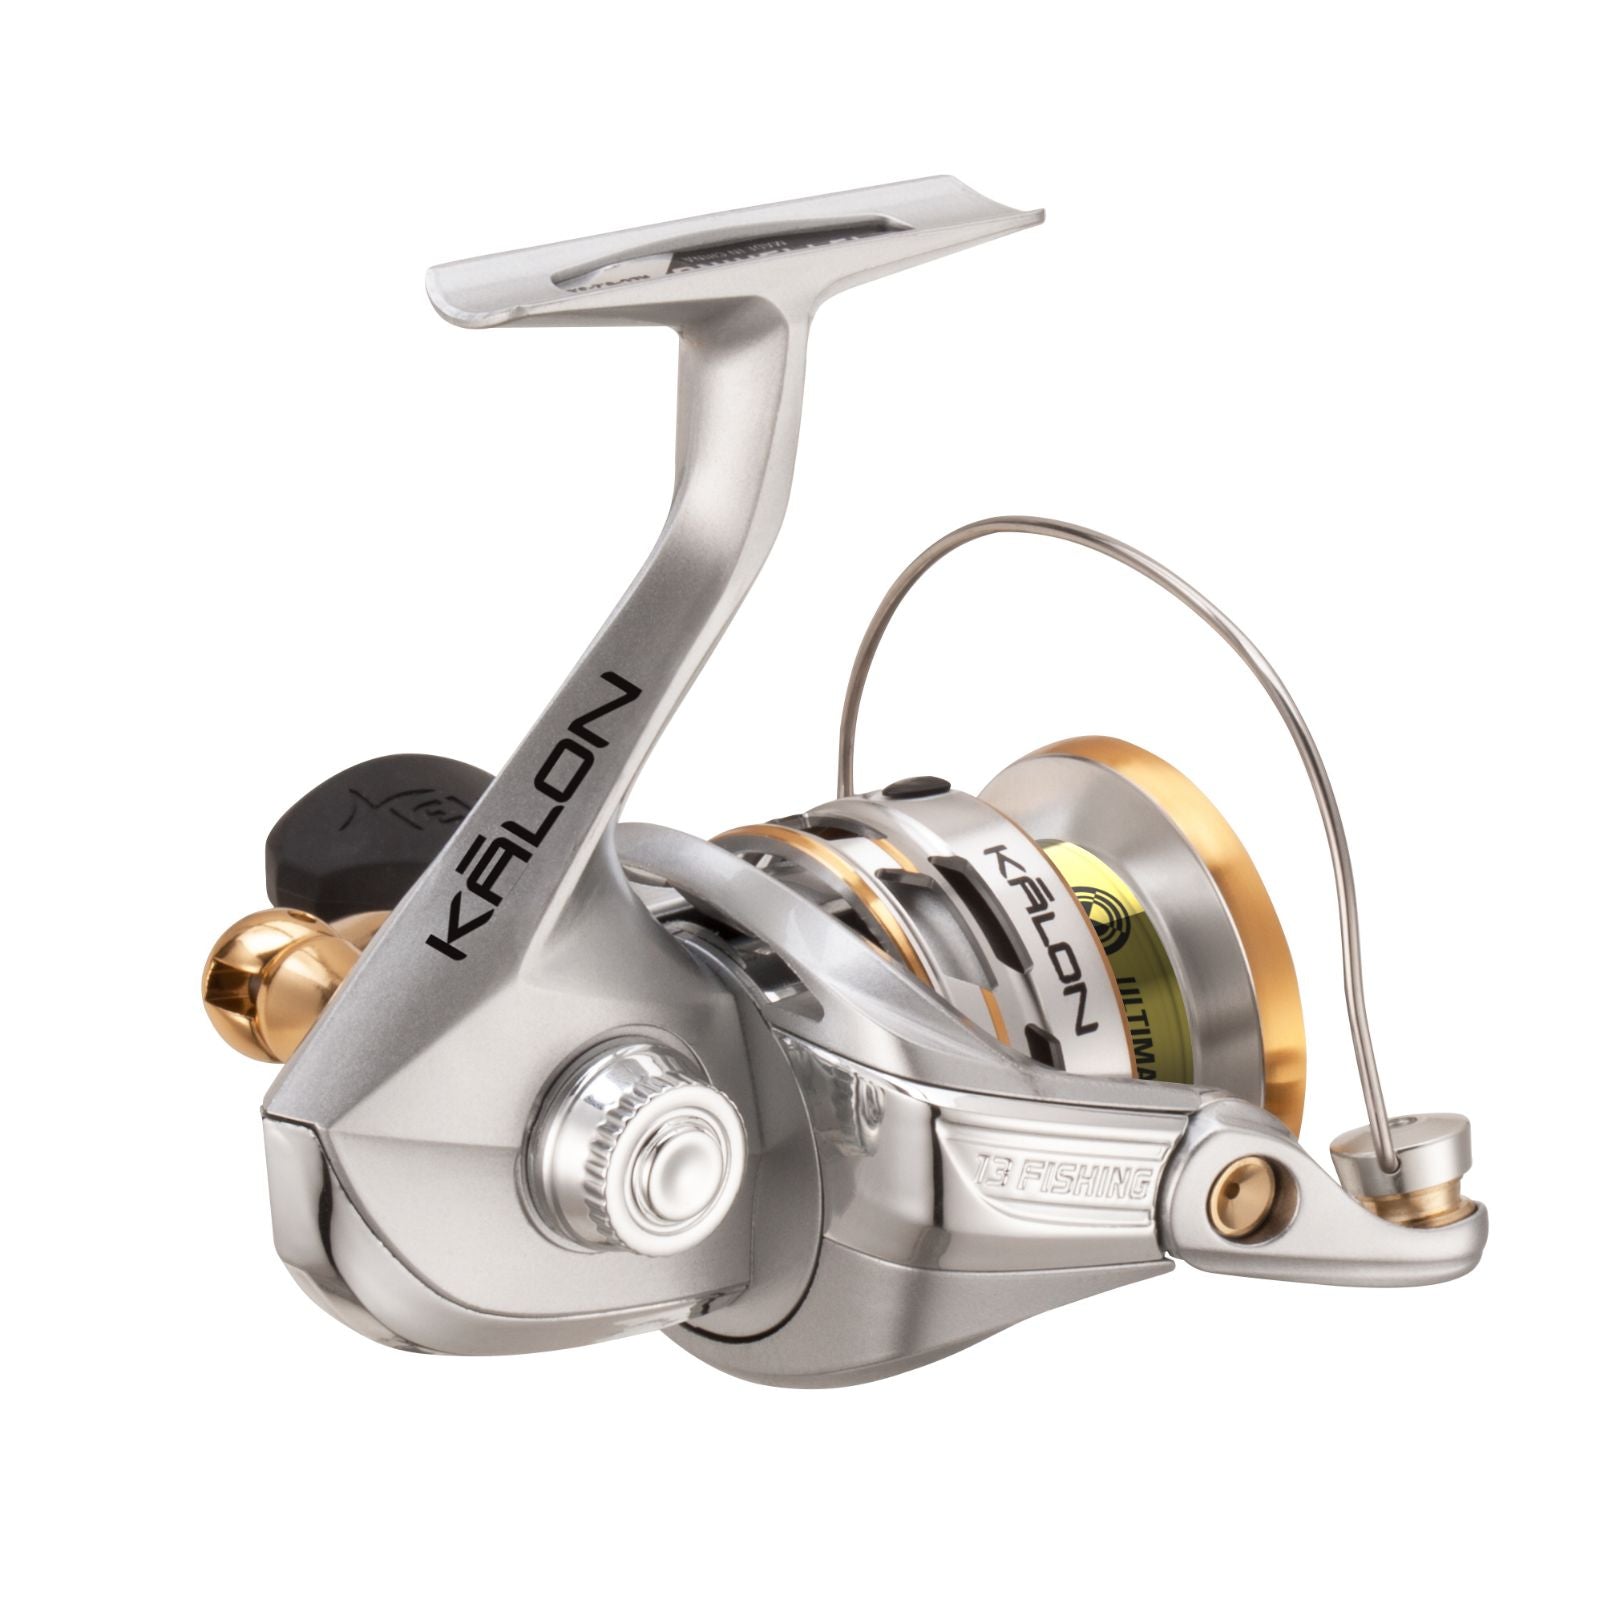 Salt and Fresh 13 Fishing Kalon C Spinning Reel from Fish On Outlet